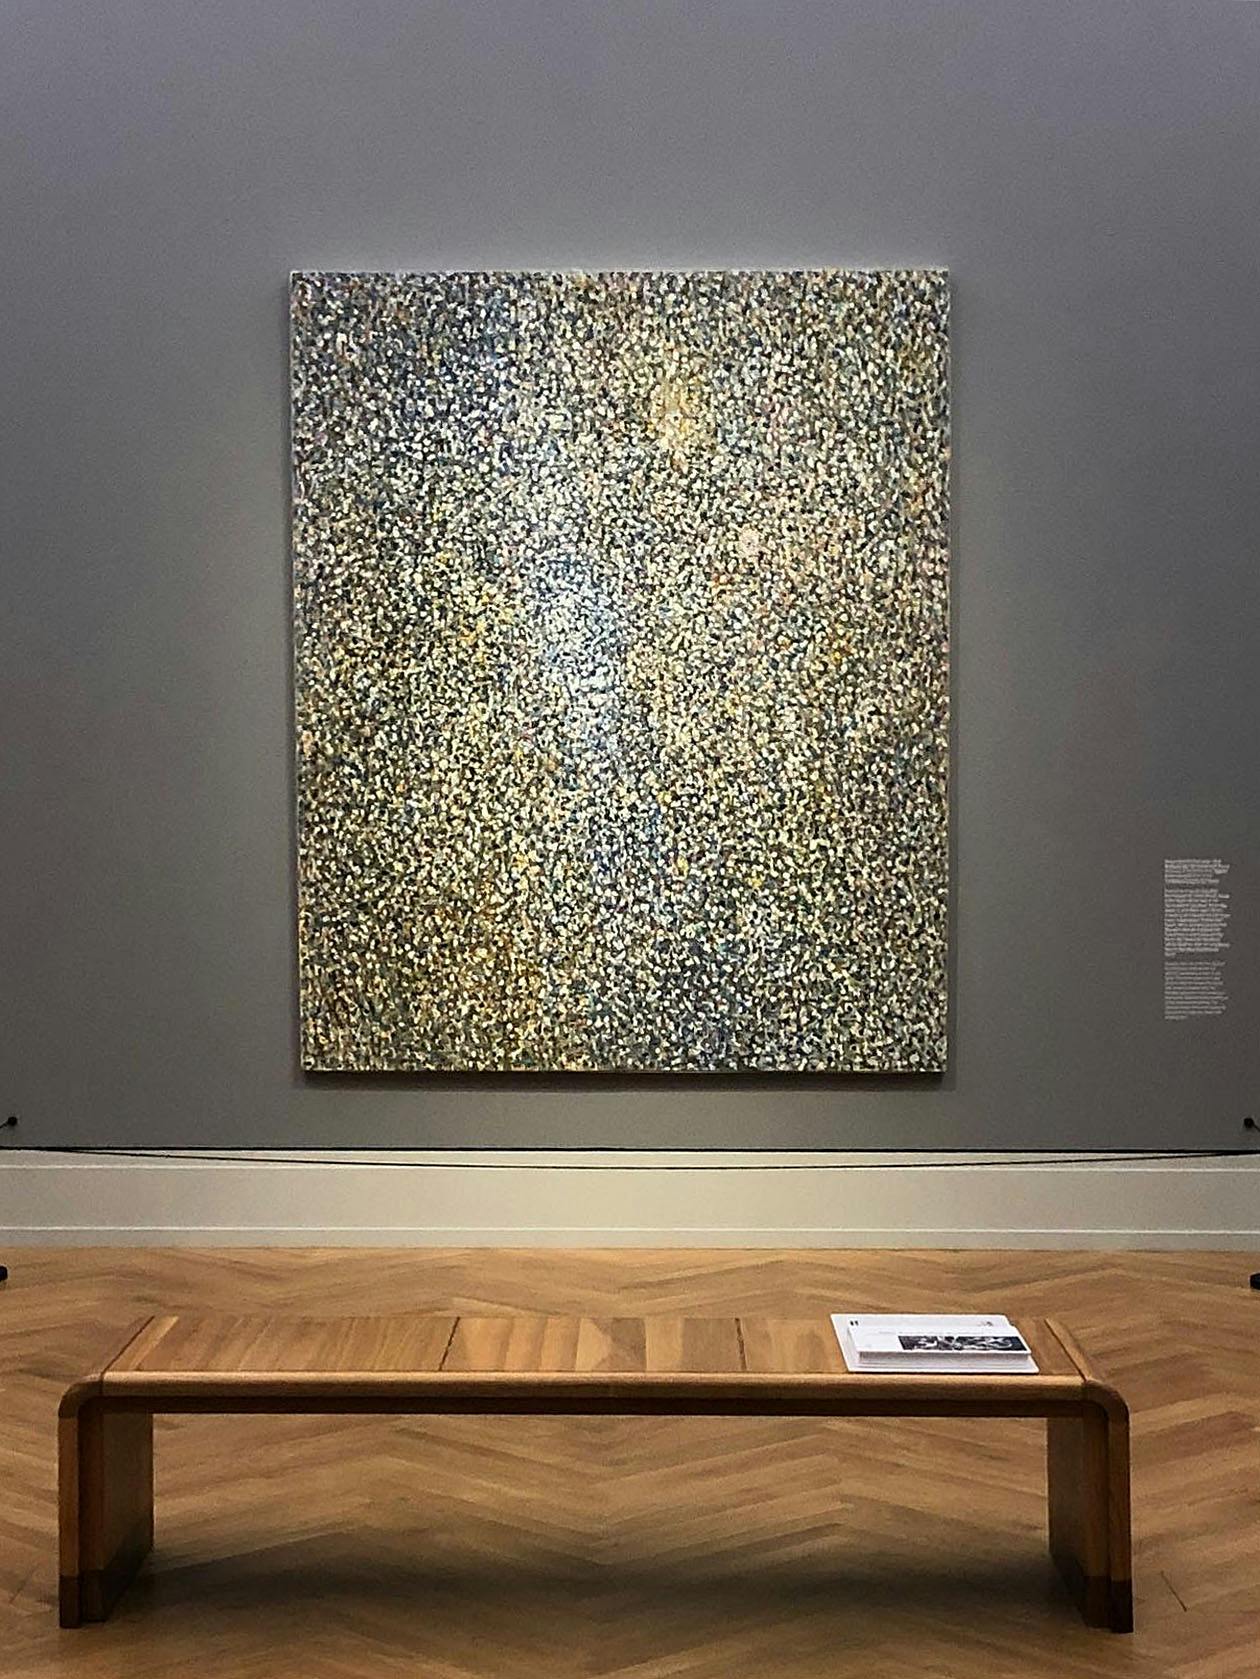 Installation view, The Shape of Freedom: International: International Abstraction after 1945, Museum Barberini, Potsdam, Germany, 2022. – The Richard Pousette-Dart Foundation